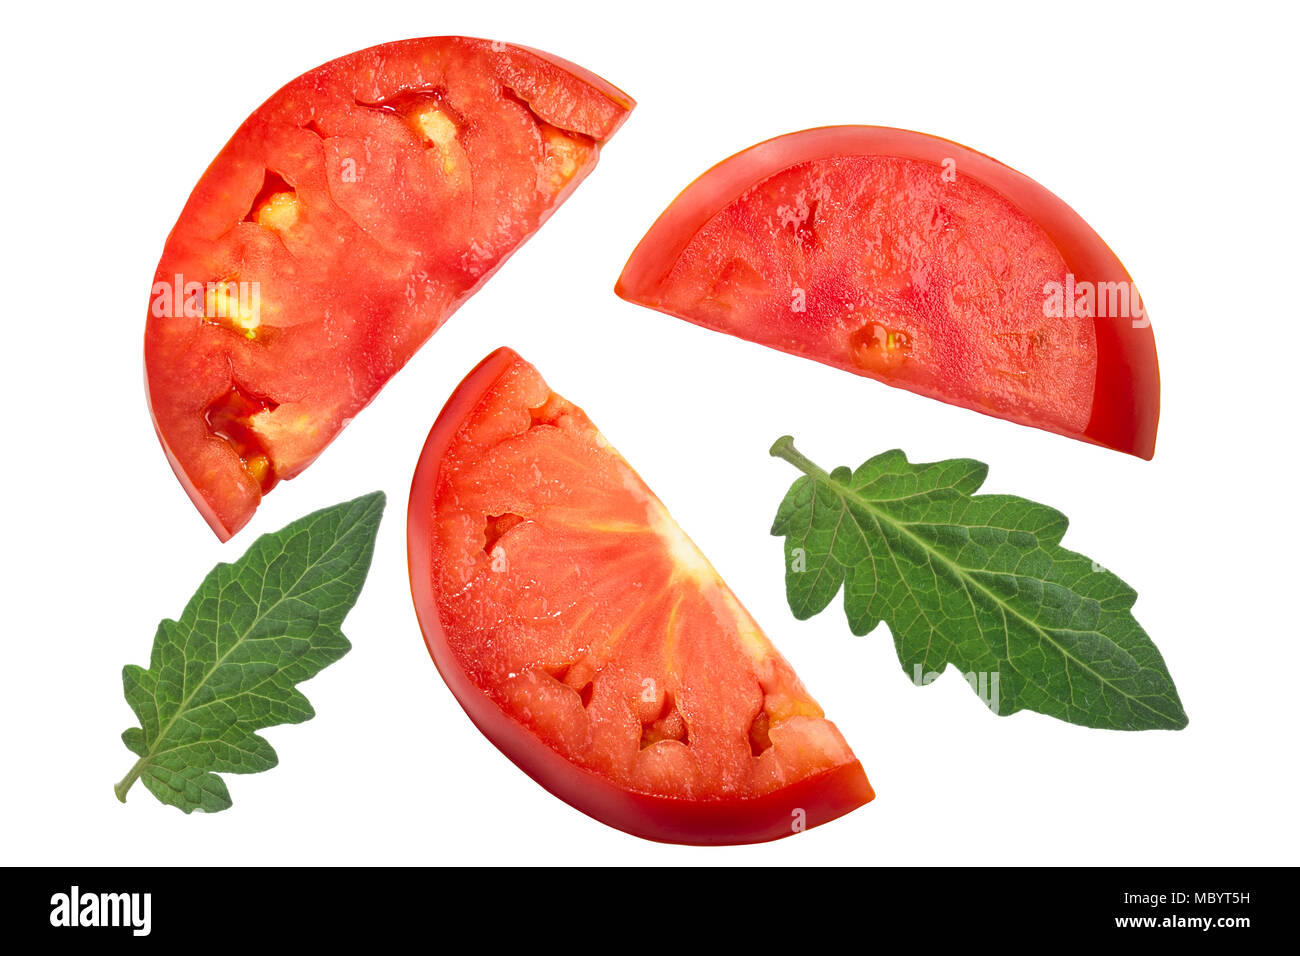 Slices of fleshy beef tomato (halved rings), top view Stock Photo